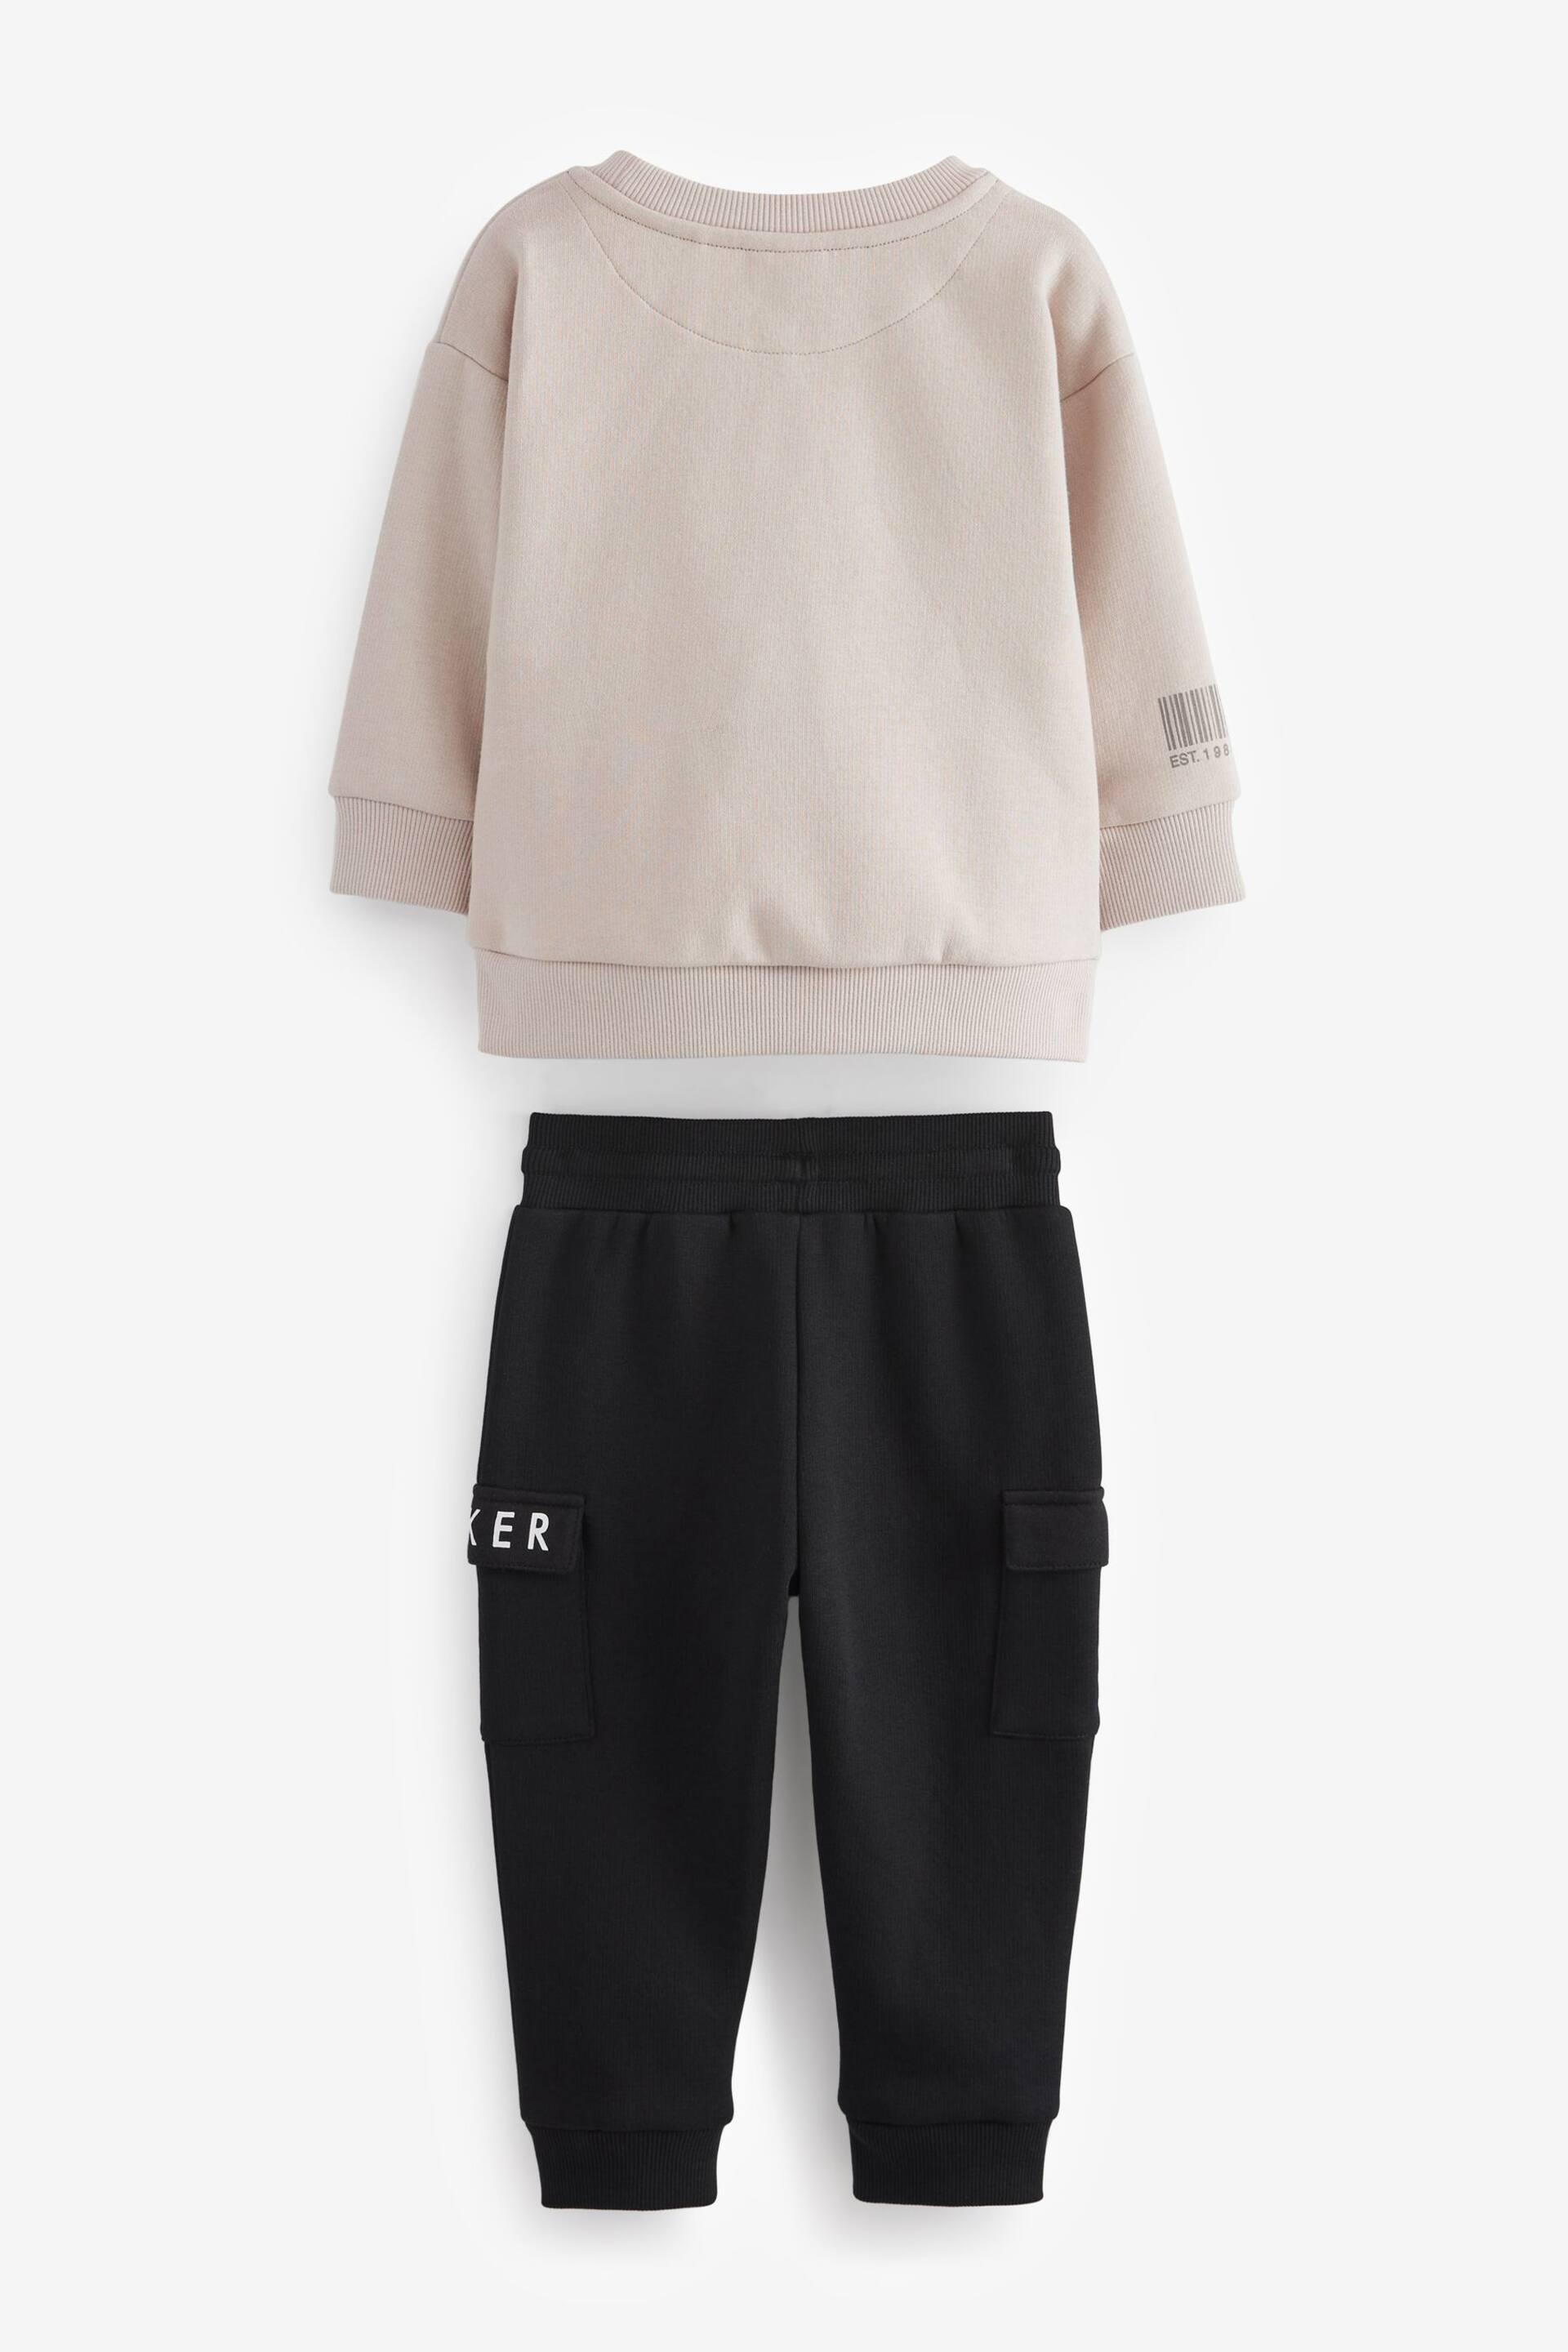 Baker by Ted Baker Sweatshirt and Cargo Joggers Set - Image 7 of 10